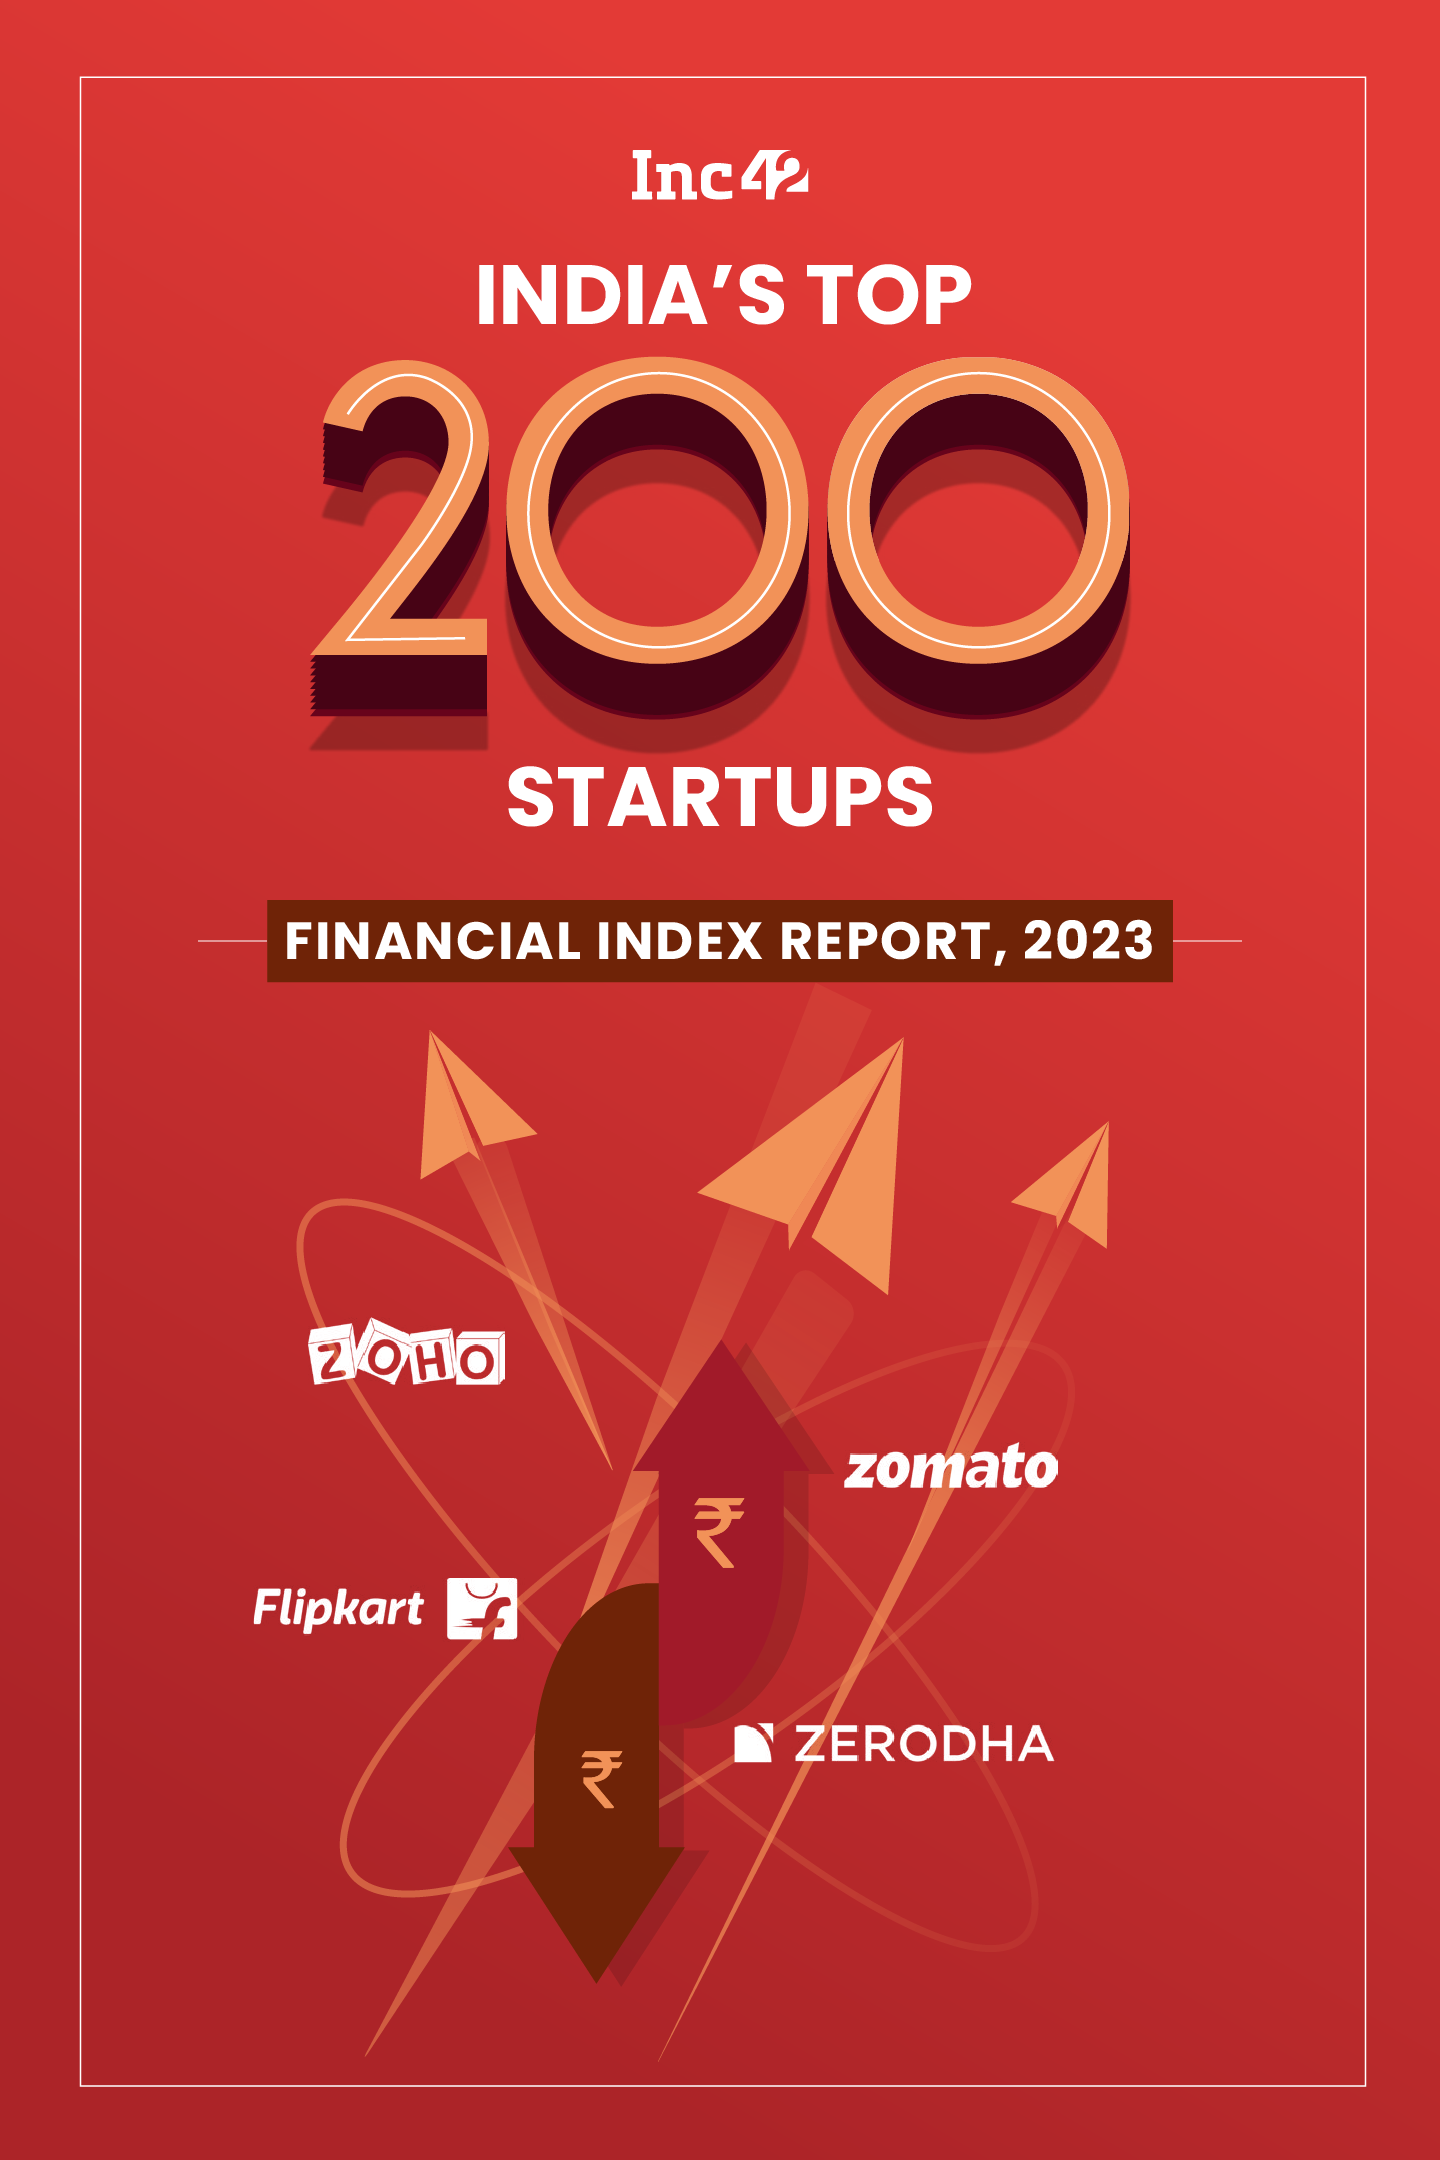 India’s Top 200 Startups Financial Index Report, 2023